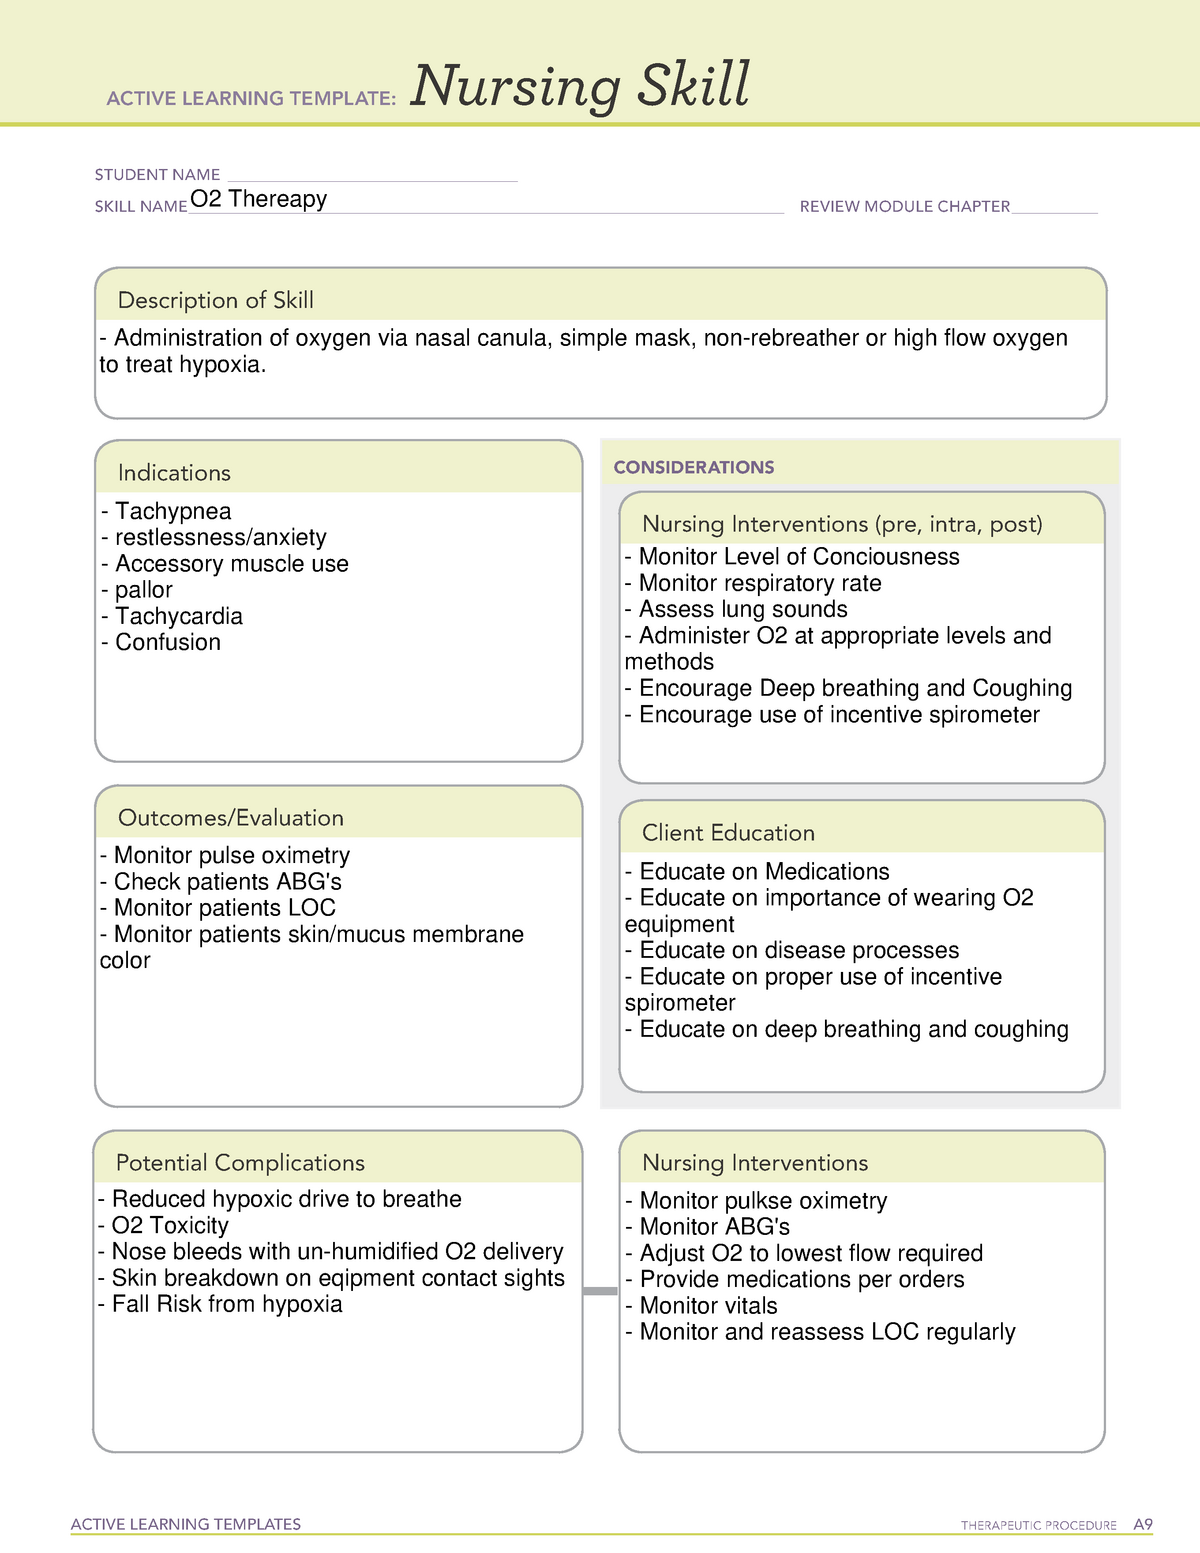 Oxygen Therapy ATI Nursing Skill Active Learning Template ACTIVE